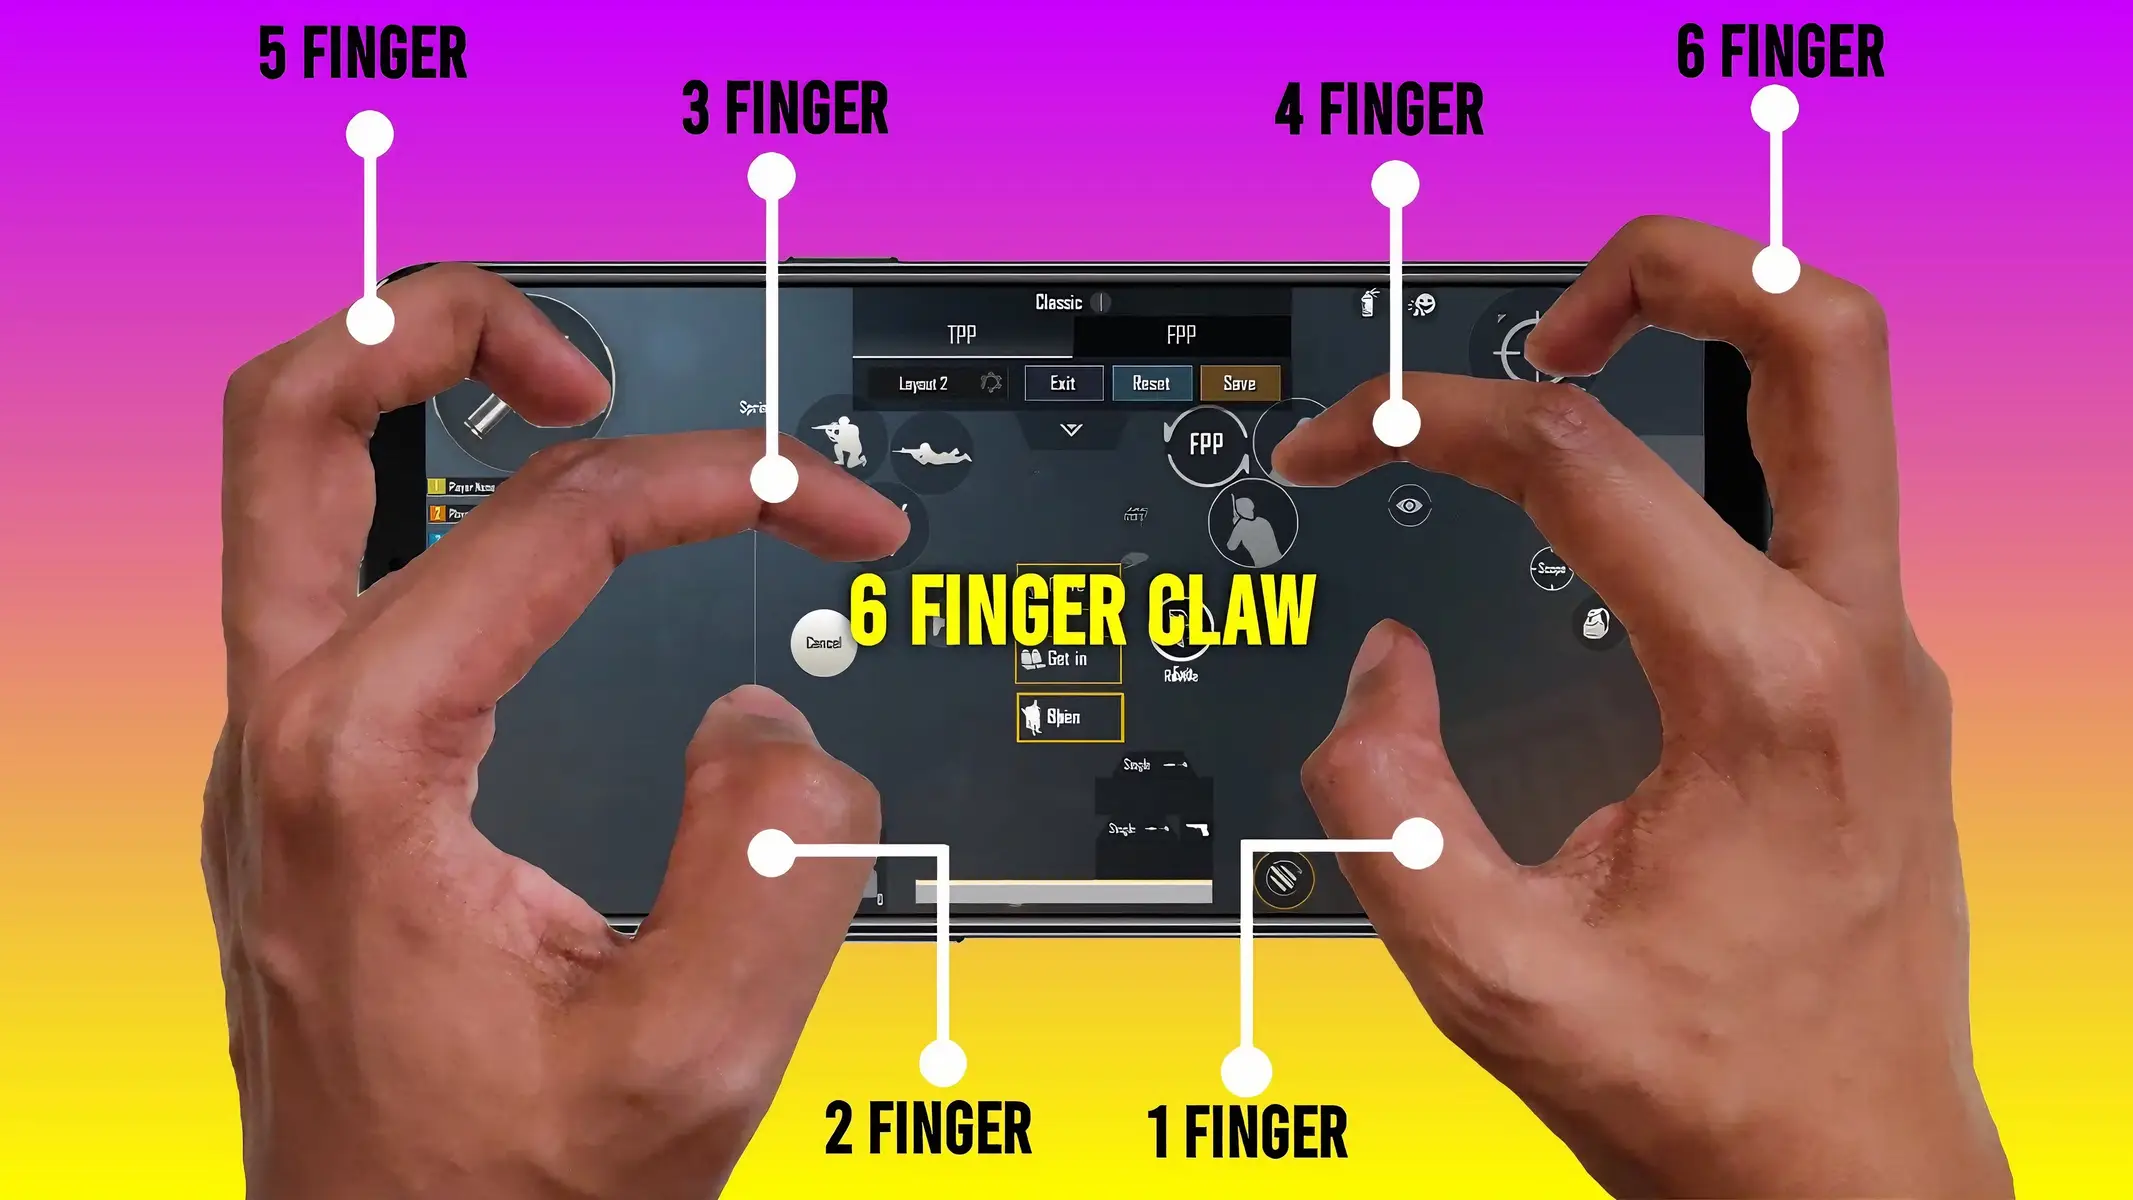 6Finger Claw Best On😱 Pubg Mobile Claw Control🎮 Part-10🔥 #foryou #pubgmobile #foryoupage #pubg #gaming #viral #fyp #fyp #🔥 #🎮 #4fingerclaw #4fingerclaw_gyro #fingerclaw #pubgsetting #5fingerclaw #3fingerclaw #6fingerclaw #2fingerclaw #ipadclawpubg #ipad #new 